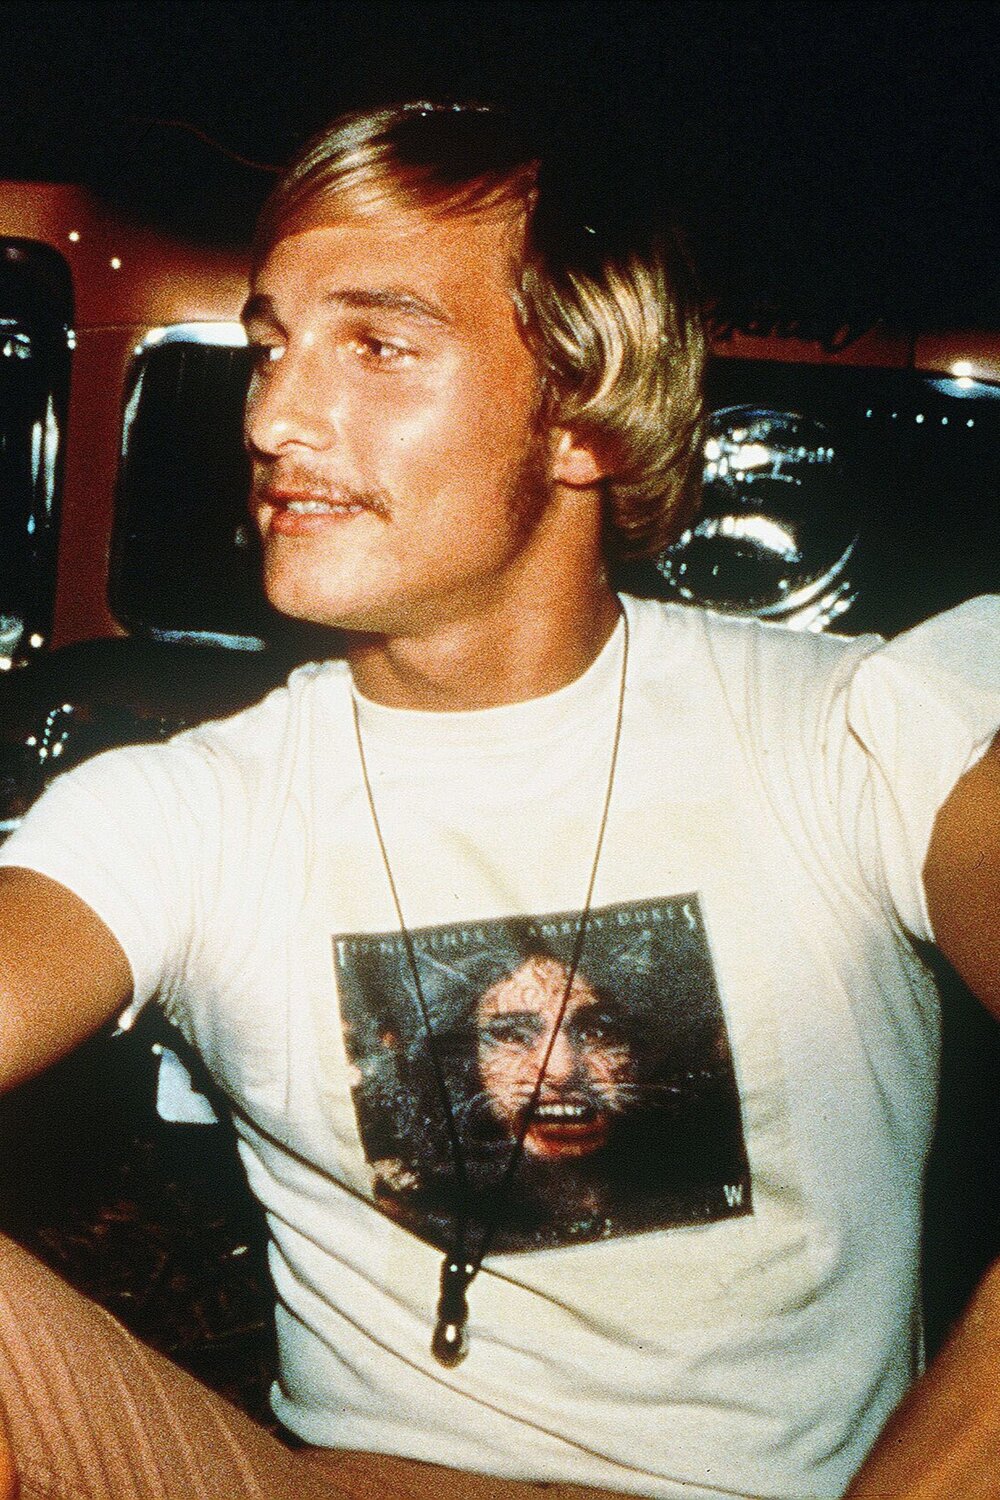 Matthew McConaughey as David Wooderson in Dazed and Confused